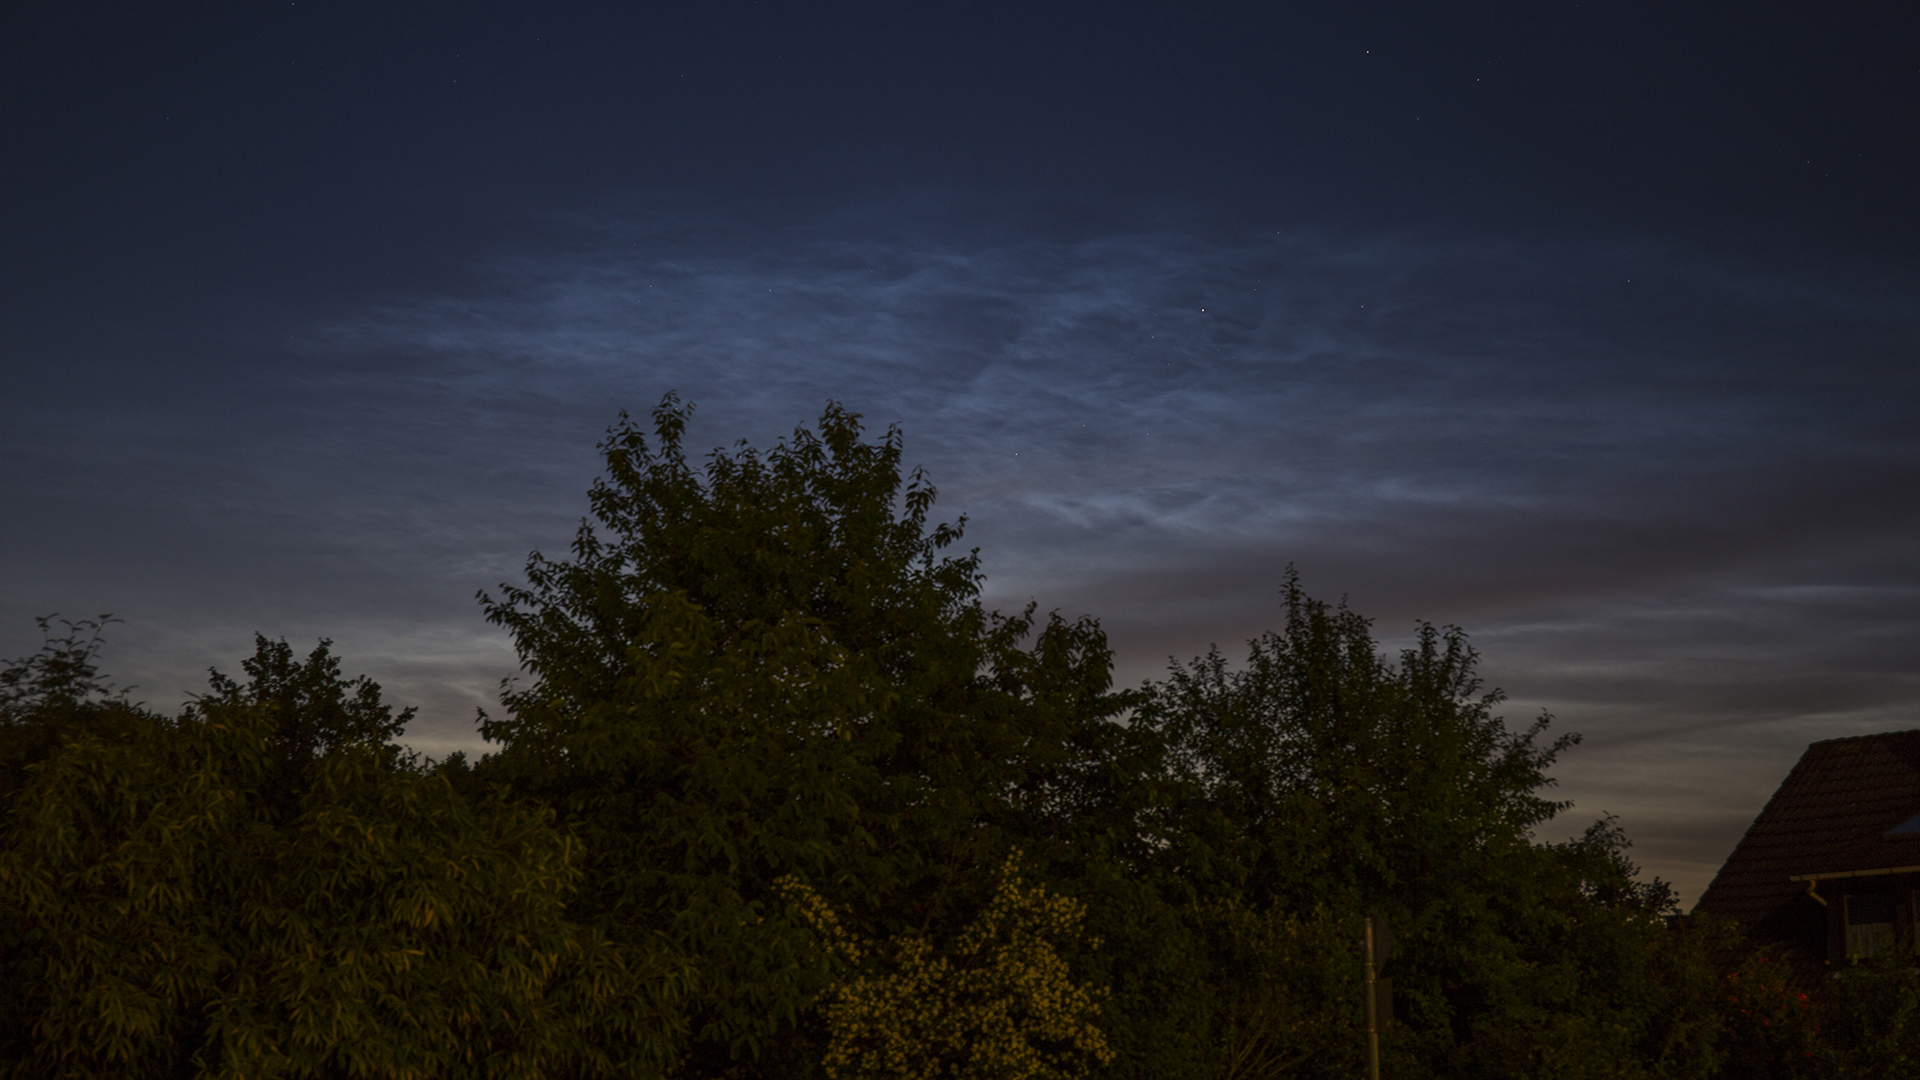 Noctilucent Clouds (2019:06:15 21:43:29 UT, Canon EOS 6D, 2s, f/4, f=70mm, ISO 400)